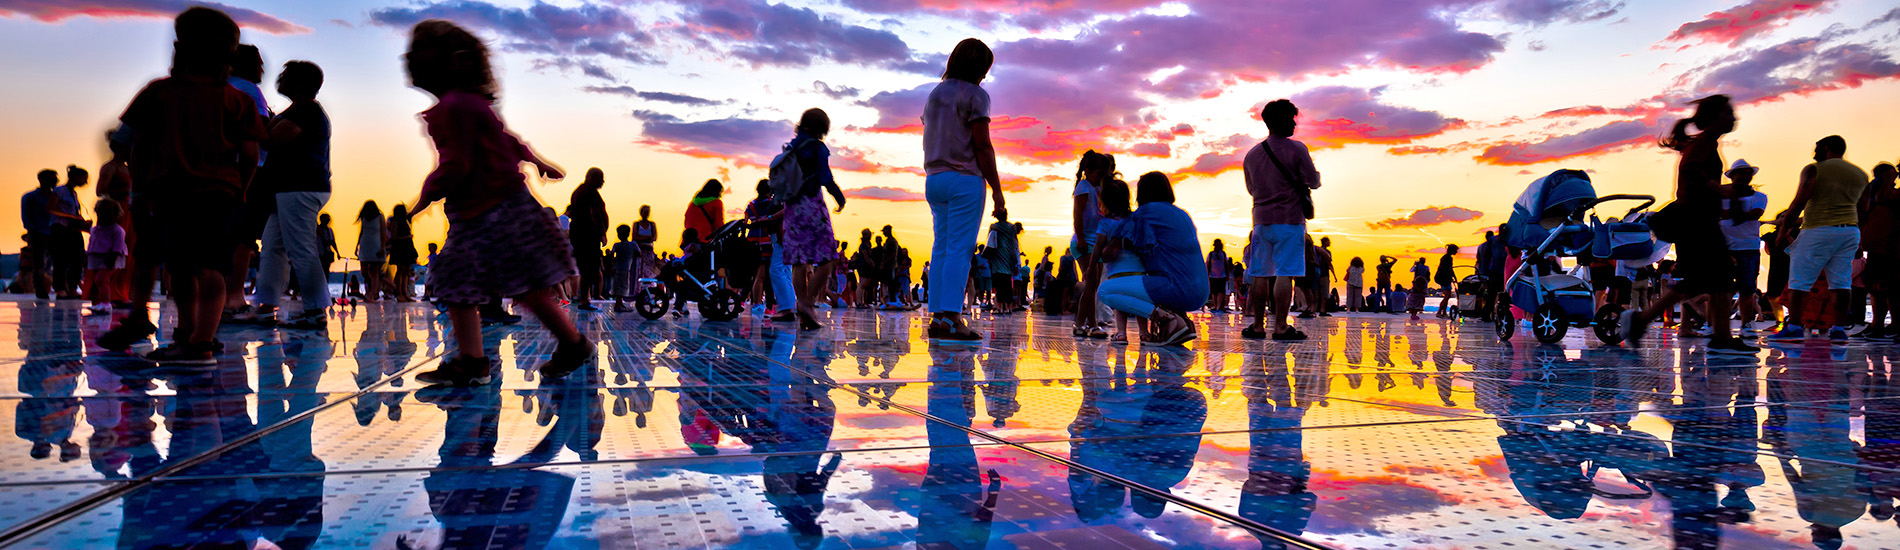 Zadar - The Greeting to the Sun